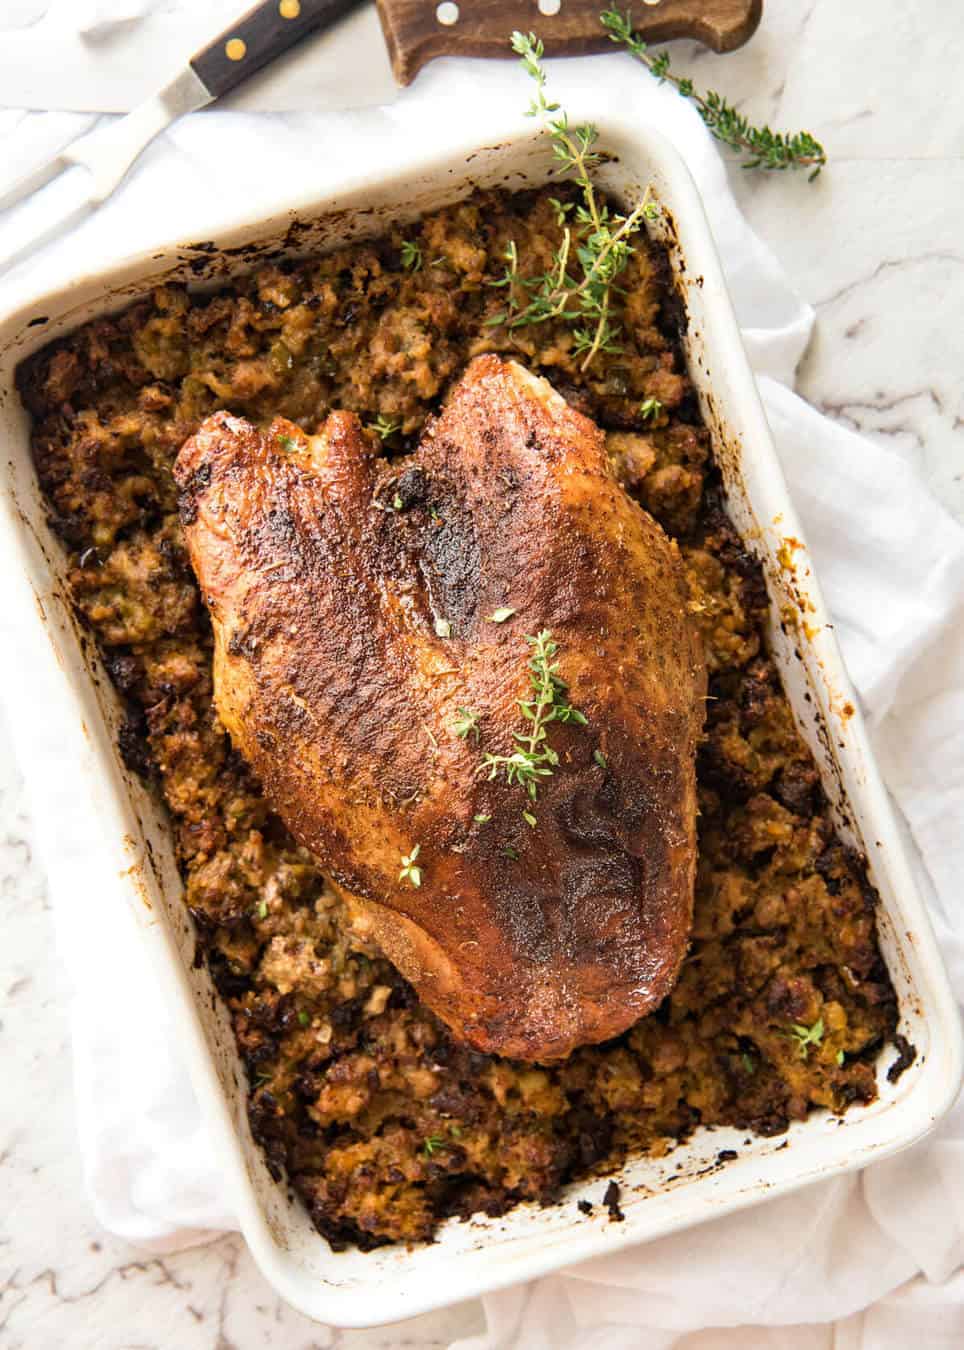 This Cajun dry brined turkey breast is baked in the same roasting pan as the Dressing / Stuffing so it's extra juicy and moist! A chef recipe, this Cajun Baked Turkey Breast with Dressing is easy and spectacular. EPIC ONE PAN COOKING for a Thanksgiving turkey! www.recipetineats.com